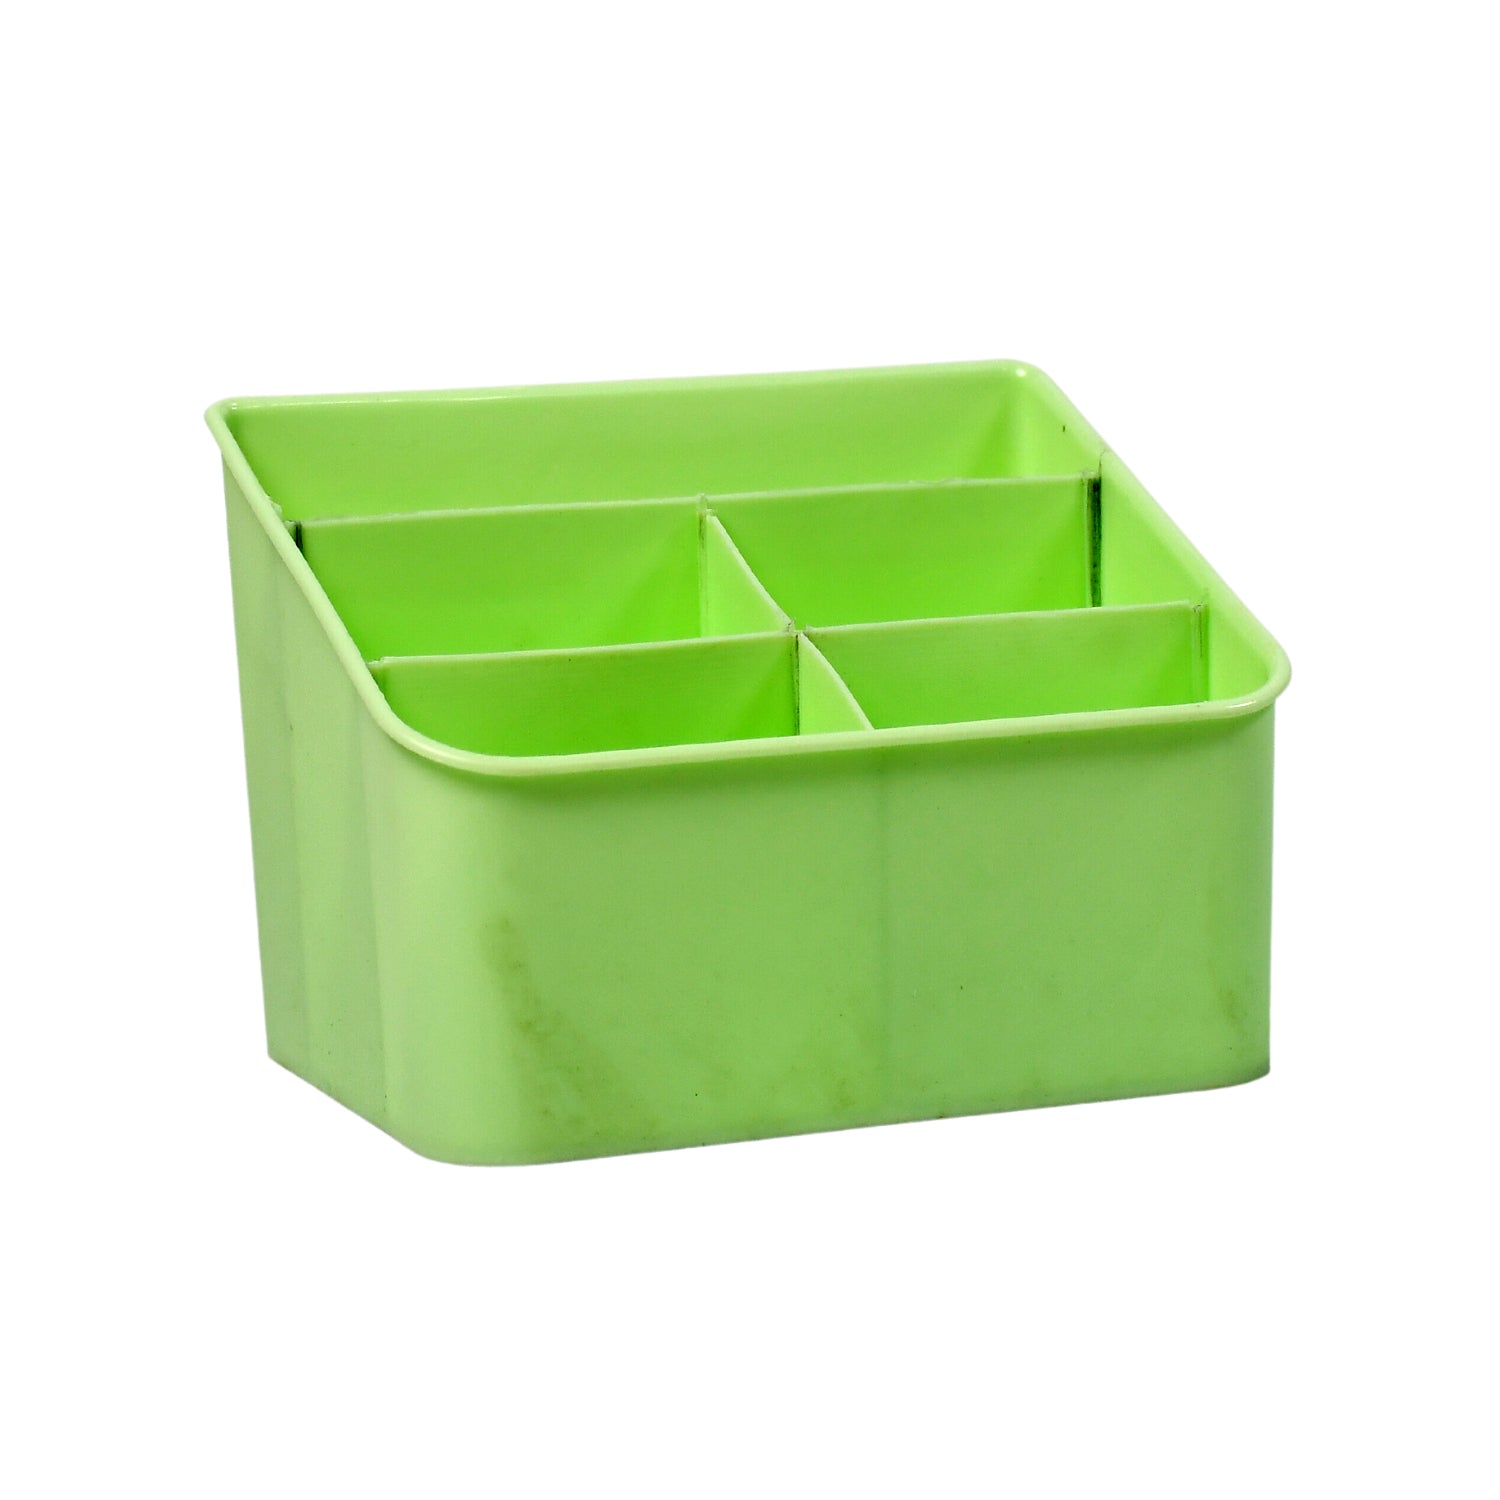 7351 Plastic Multiple Storage Box for Living Room and Bathroom Space Saver Storage Box JK Trends